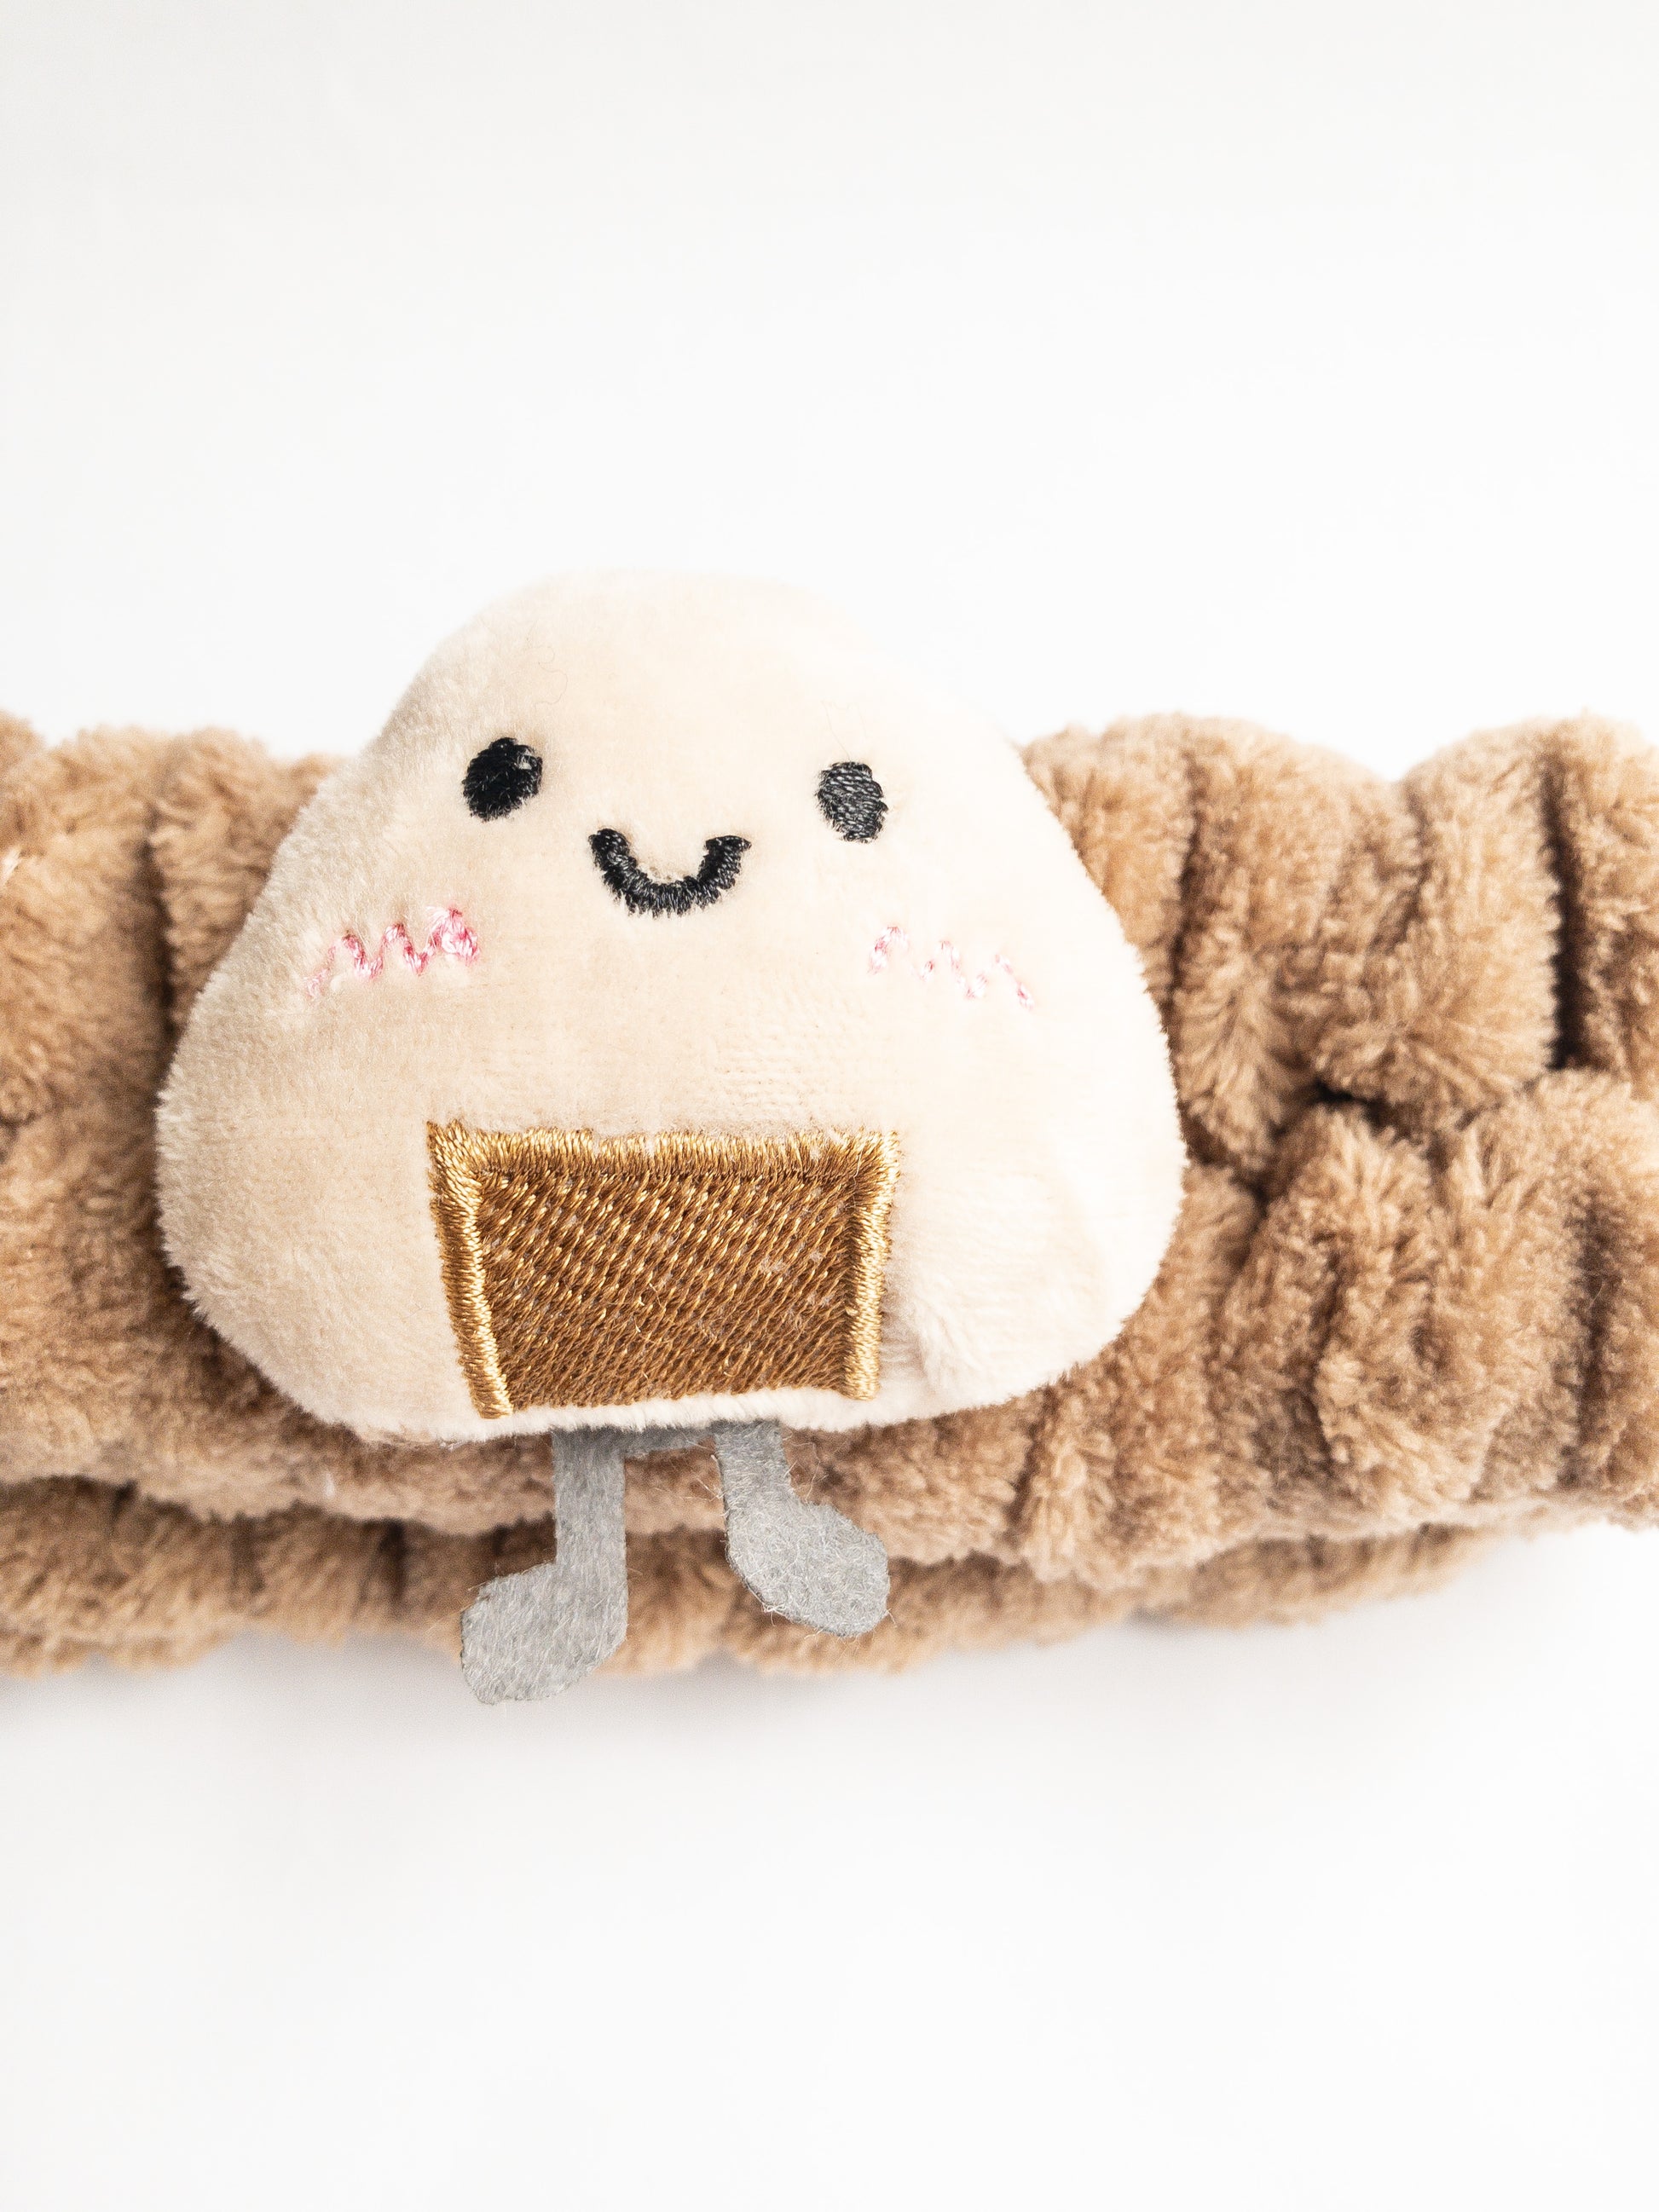 Our adorable onigiri plush spa headband makes the perfect accessory for all your spa days! Each headband is so soft and comfy with a cute rice ball (ju-mok bap in Korean). Pamper yourself in plushy-goodness and sweet, sweet relaxation! Go ahead, you deserve it!